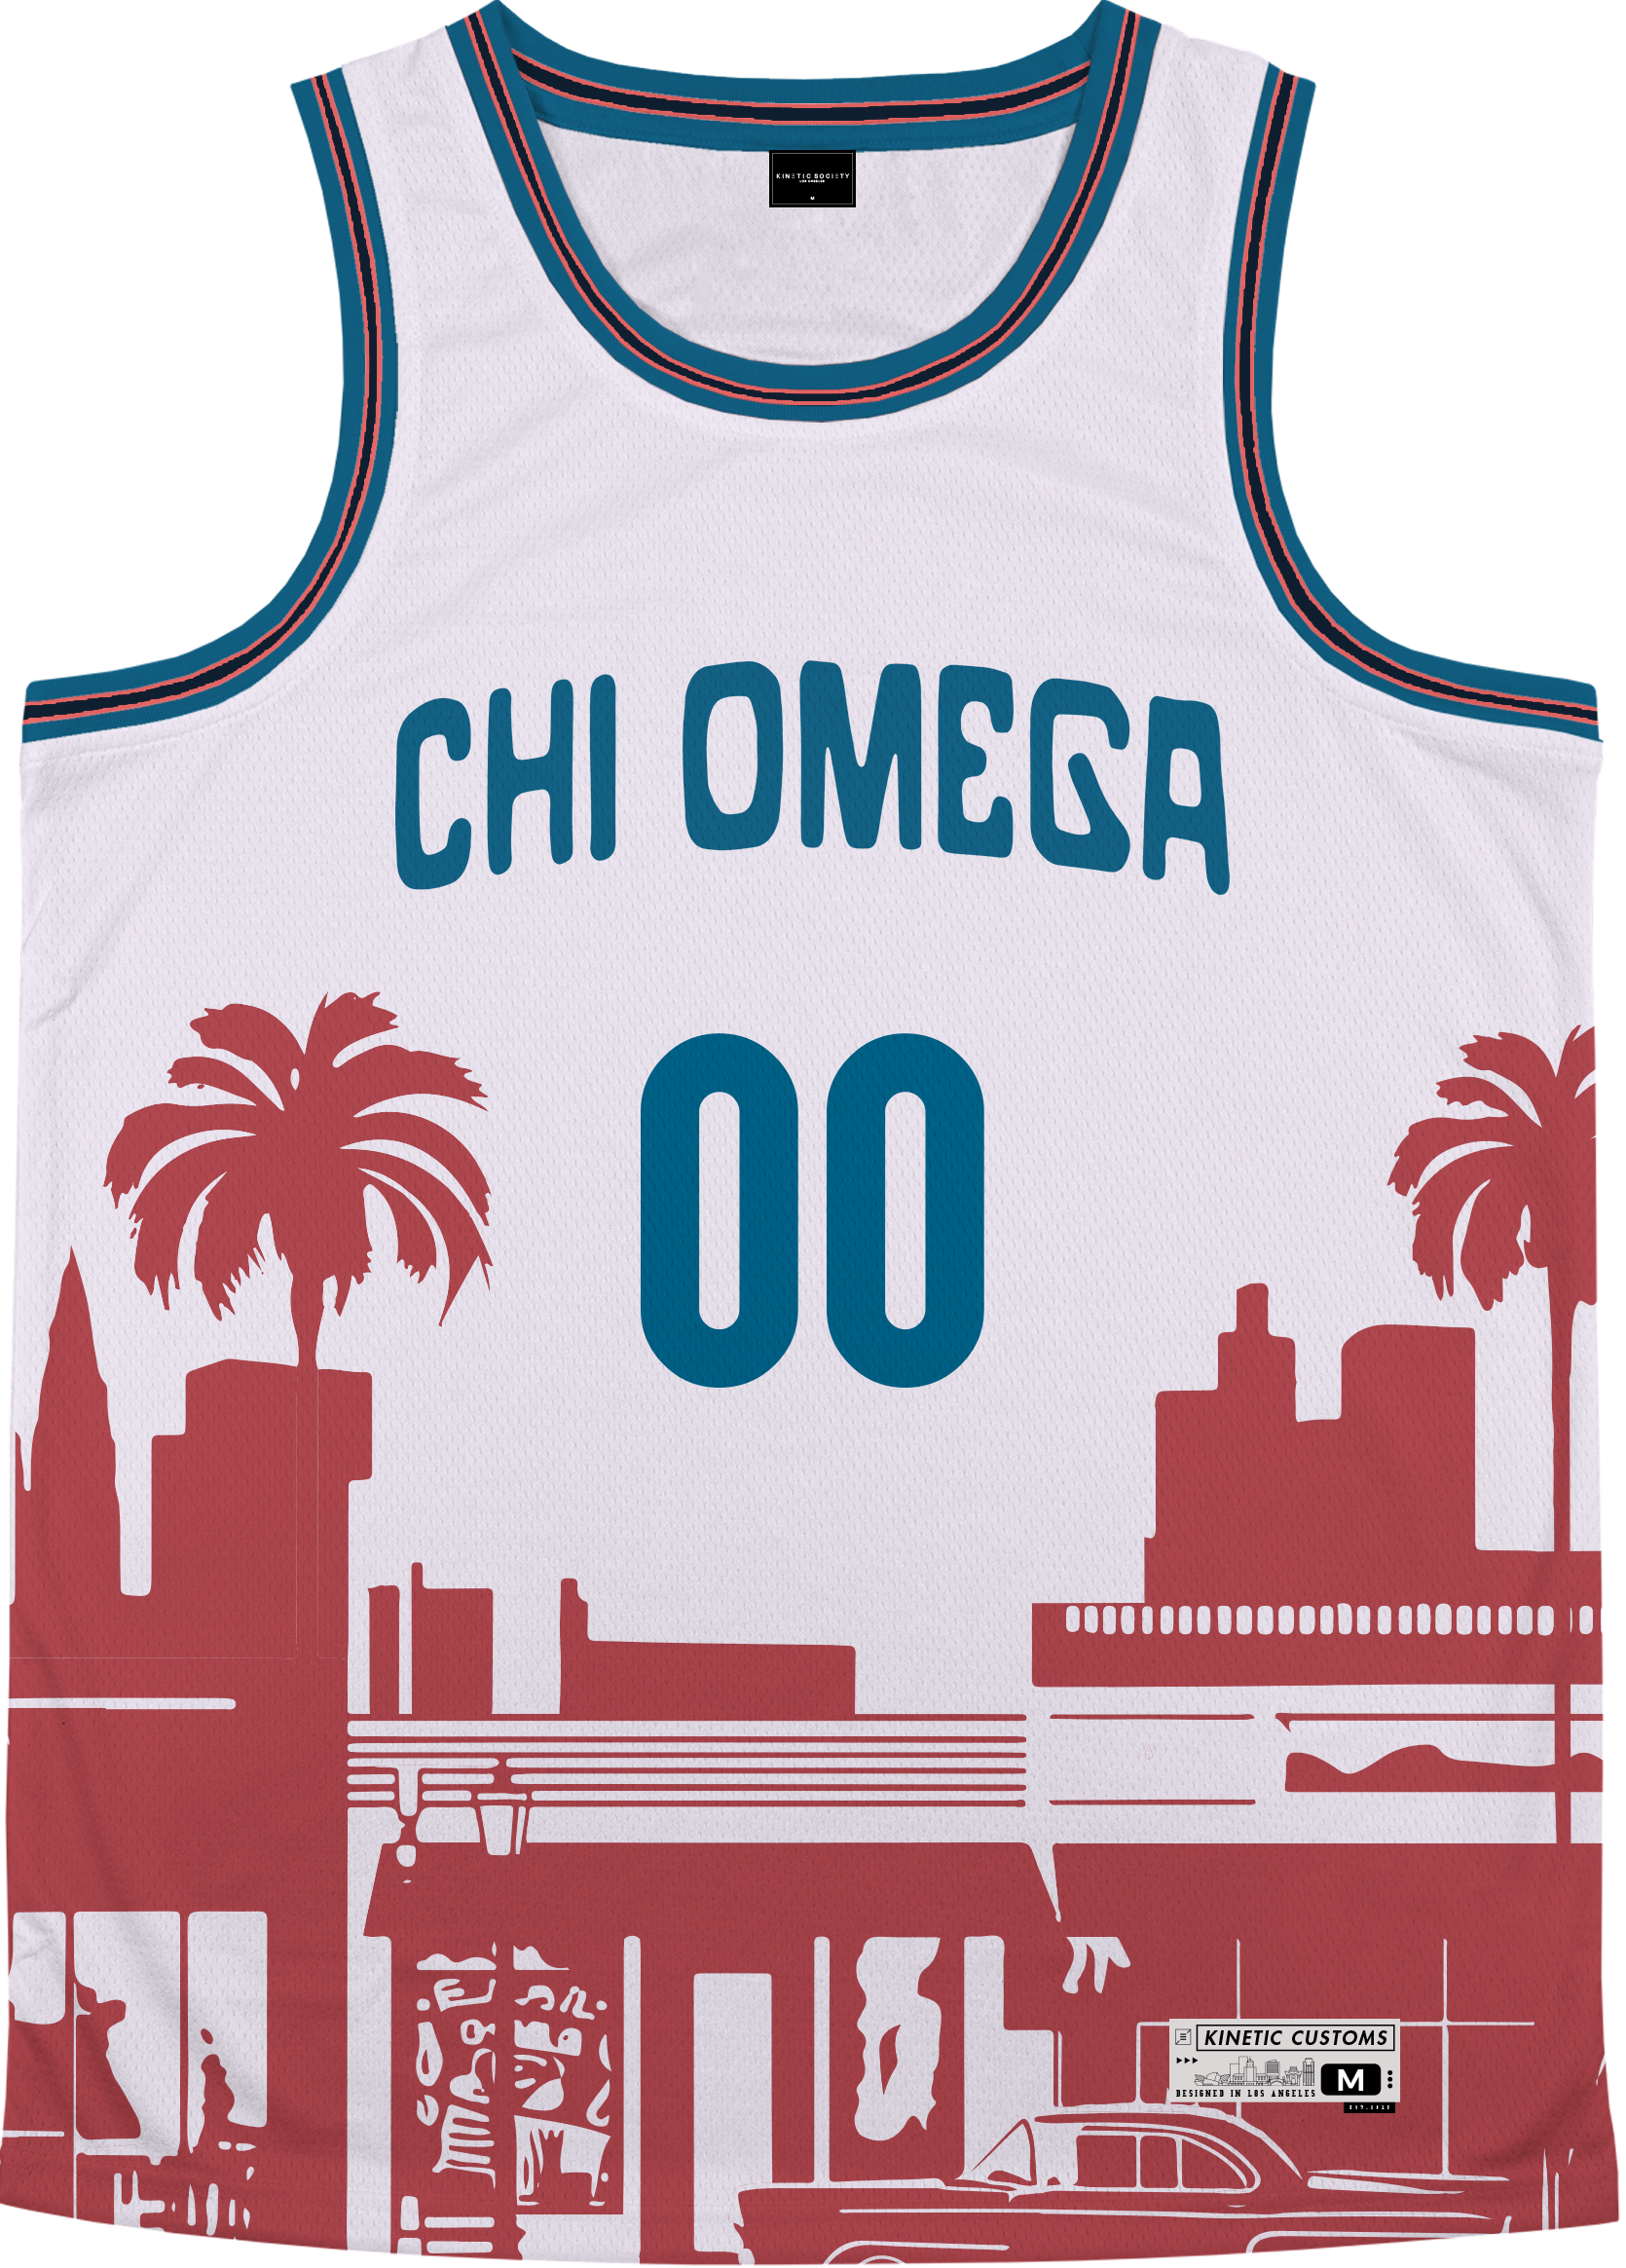 CHI OMEGA - Town Lights Basketball Jersey